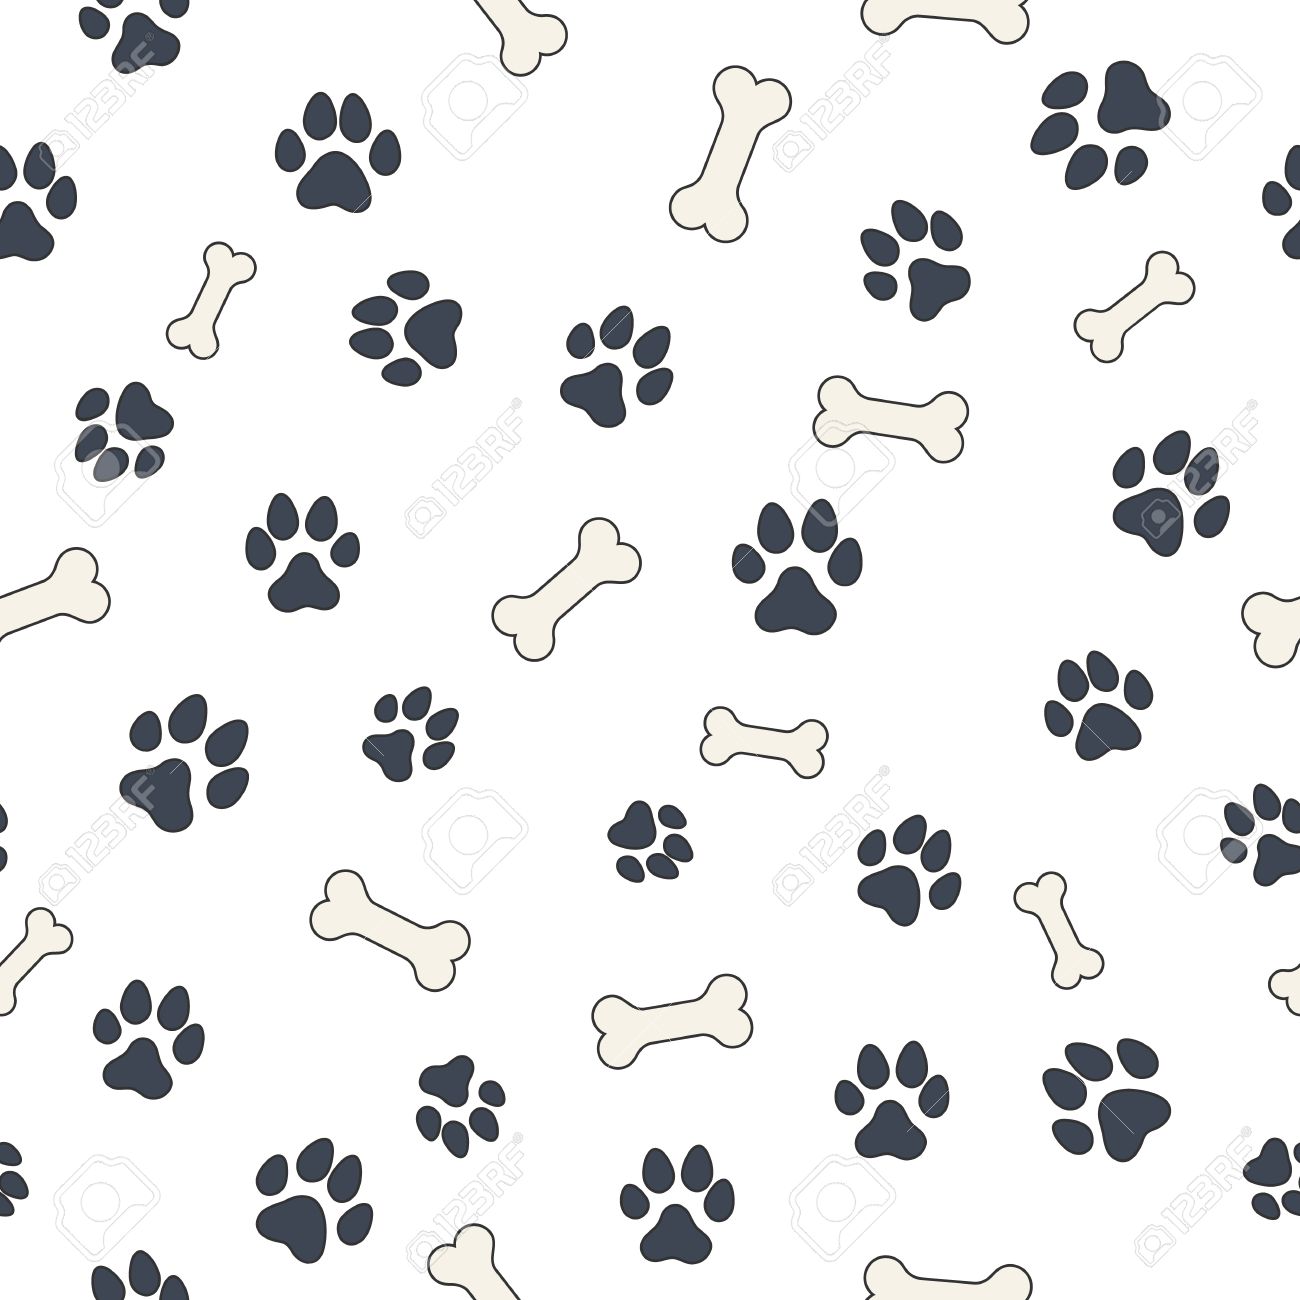 Seamless Wallpaper Pattern With Dogs Bones And Paws For Your